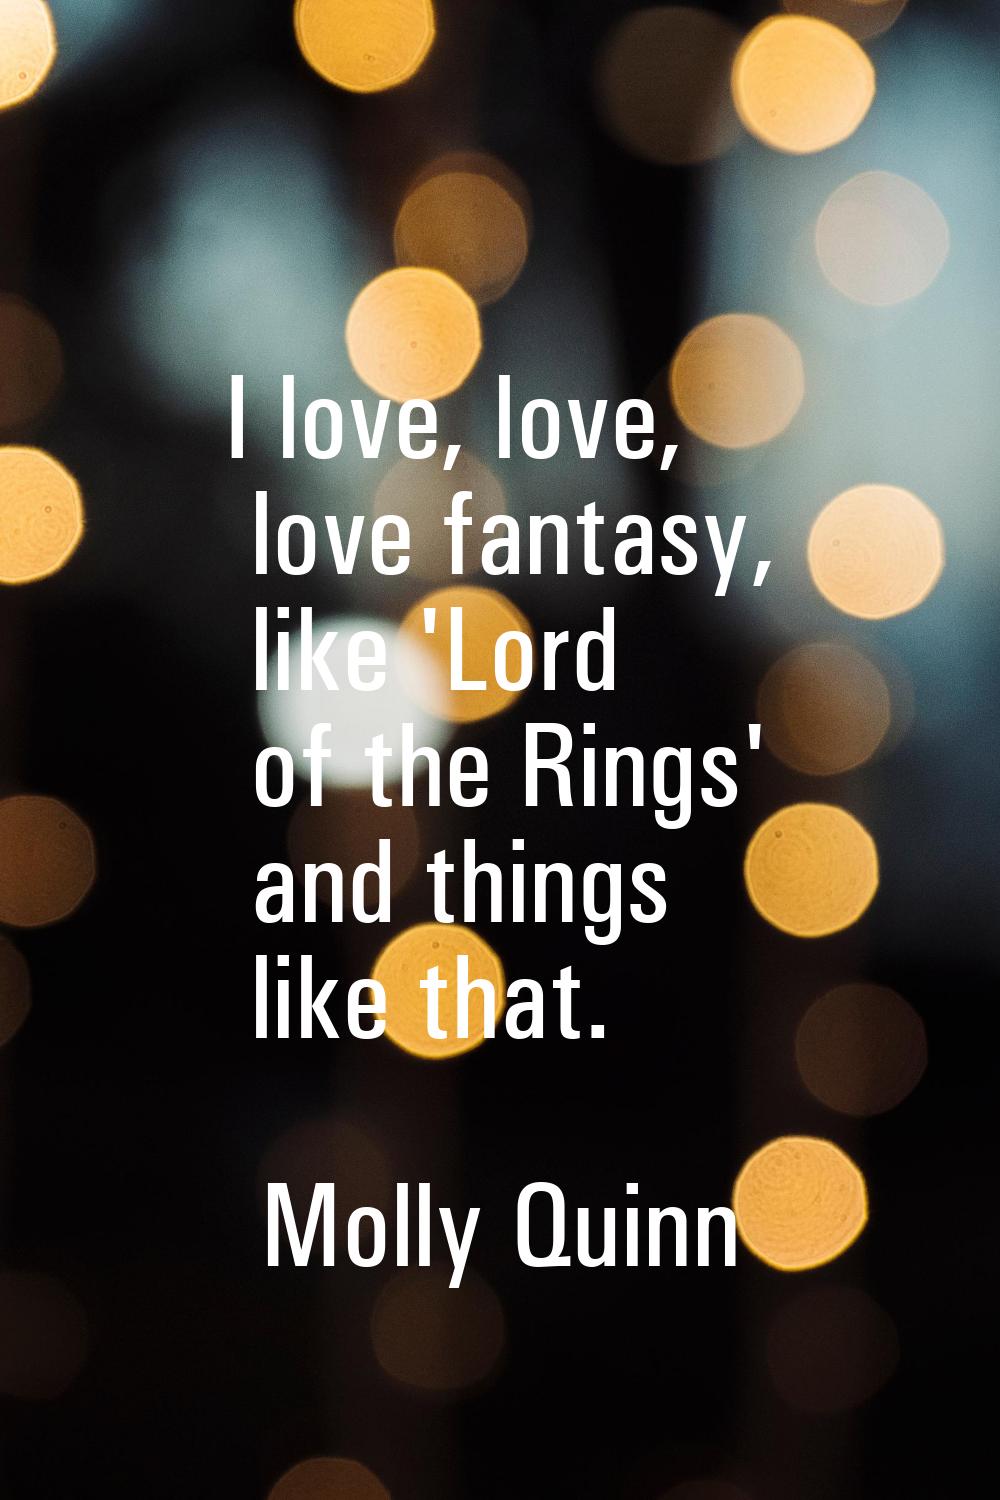 I love, love, love fantasy, like 'Lord of the Rings' and things like that.